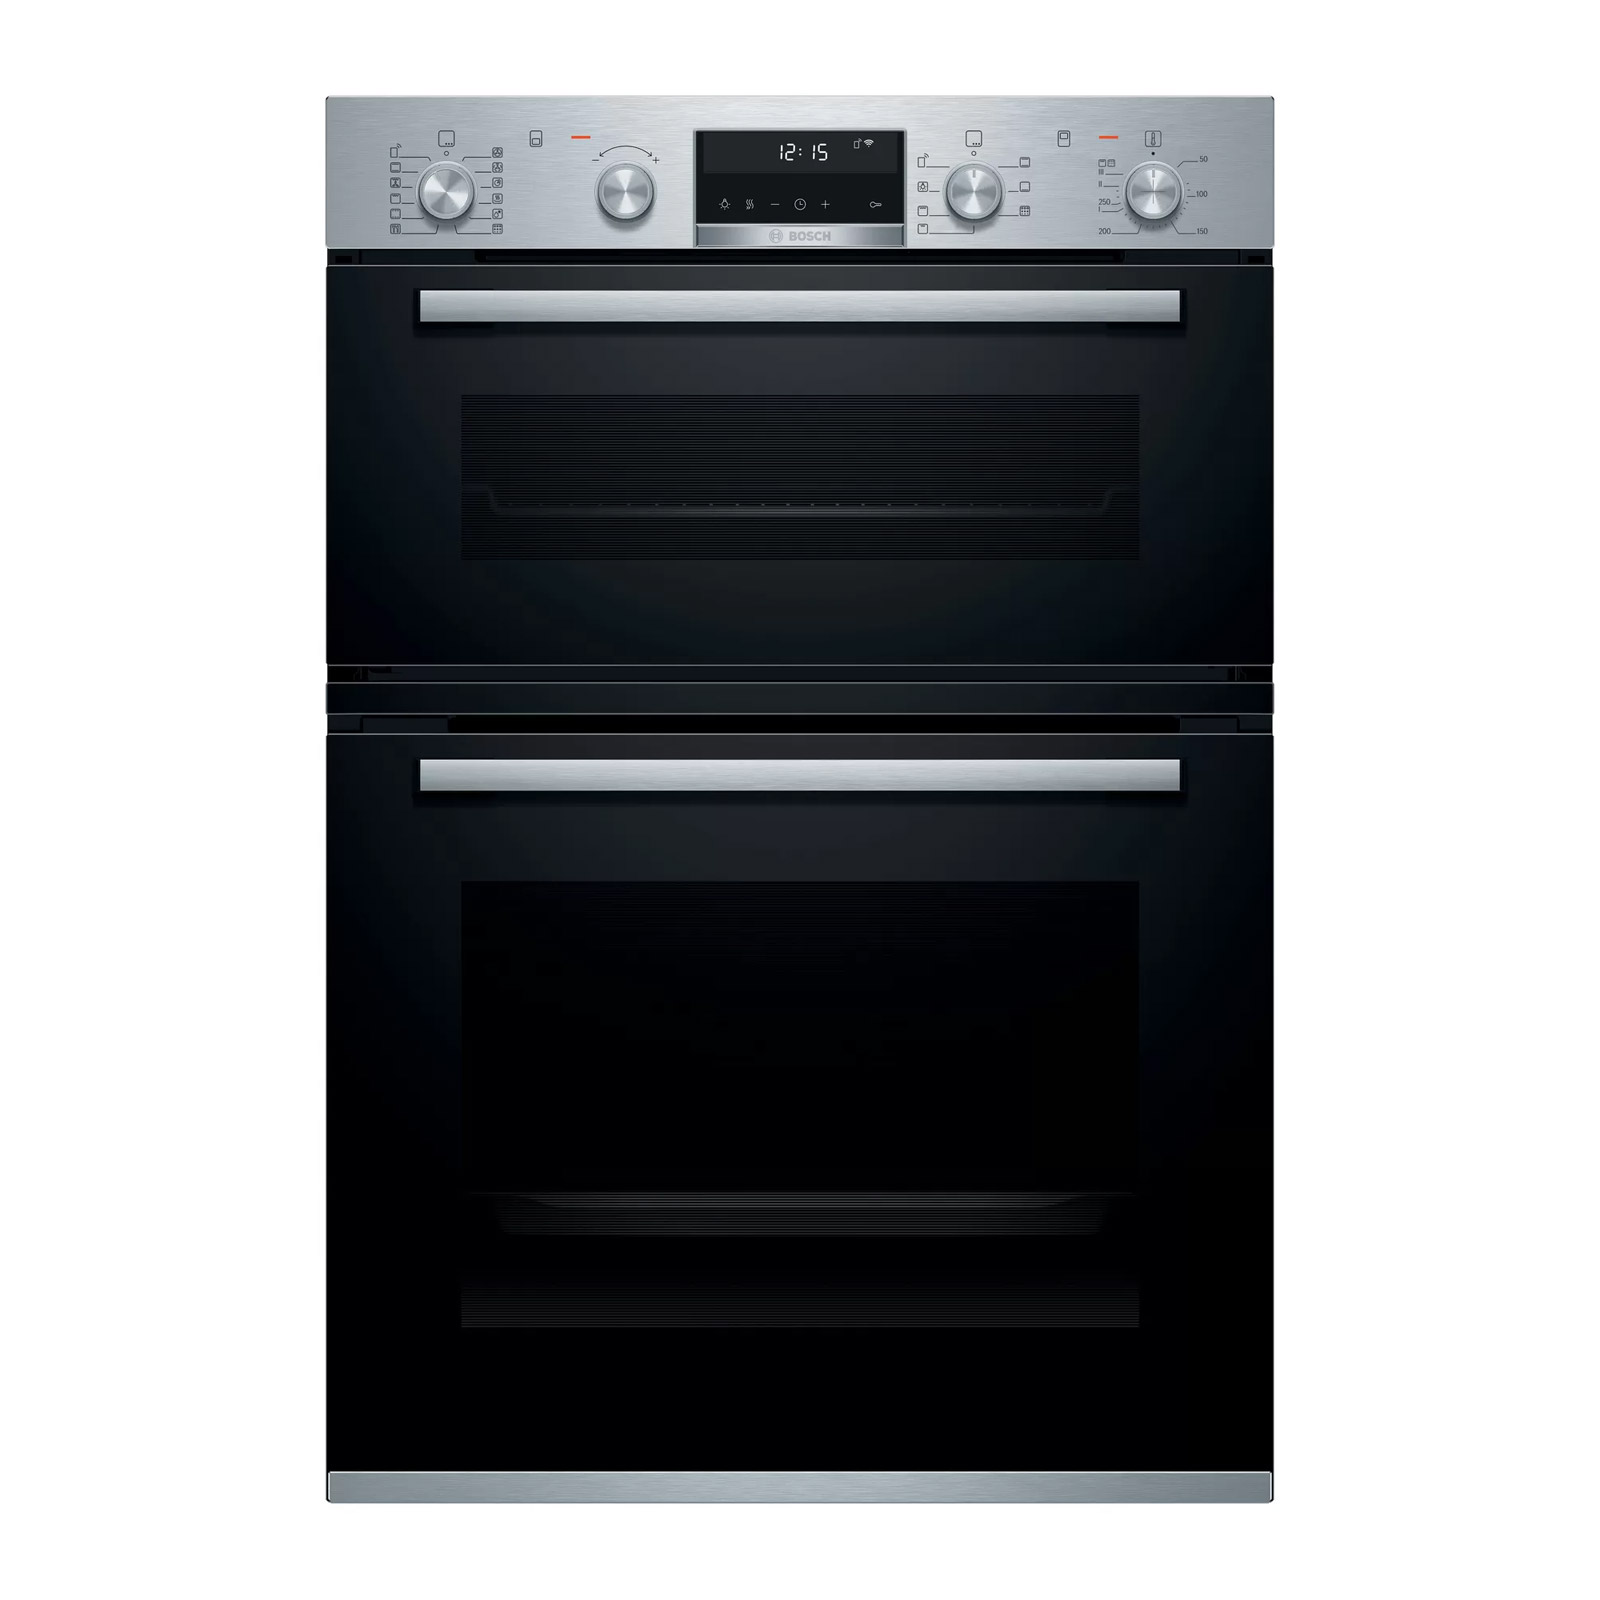 Bosch MBA5785S6B Series 6 Built In Electric Double Oven in Br Steel